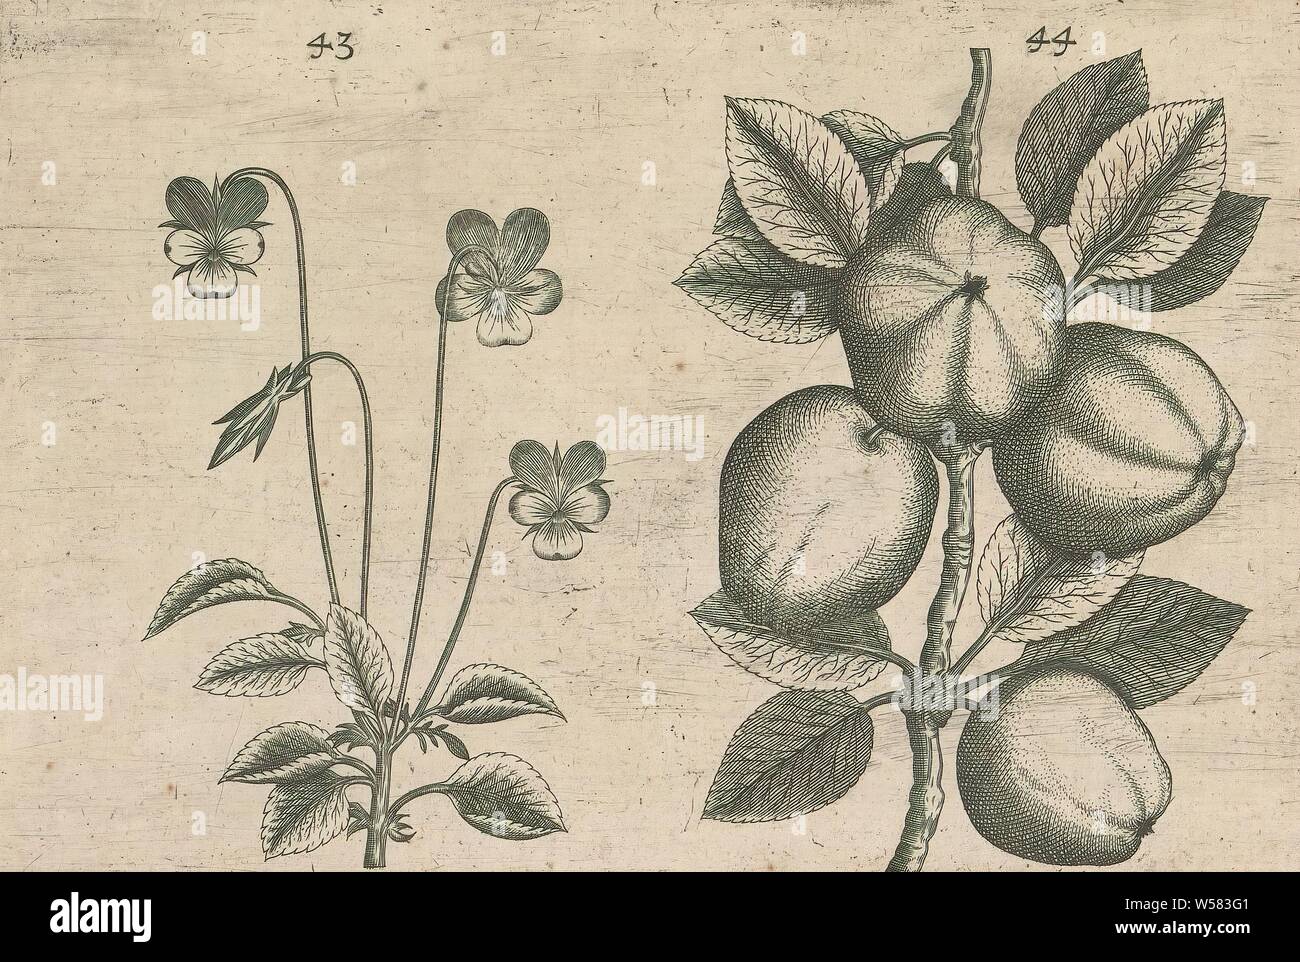 Tricolor violet (Viola tricolor) and apple (Malus pumila), Tricolor violet and apple. FIGs. 43 and 44 on a sheet hand numbered 23. In: Anselmi Boetii de Boot I.C. Brugensis & Rodolphi II. Imp. Novel. medici a cubiculis Florum, Herbarum, ac fructuum selectiorum icones, & vires pleraeque hactenus ignotæ. Part of the album with sheets and plates from De Boodt's herbarium from 1640. The twelfth of twelve albums with watercolors of animals, birds and plants known around 1600, commissioned by Emperor Rudolf II, fruits: apple, flowers: violet, anonymous, 1604 - 1632 and/or 1640, paper, ink Stock Photo